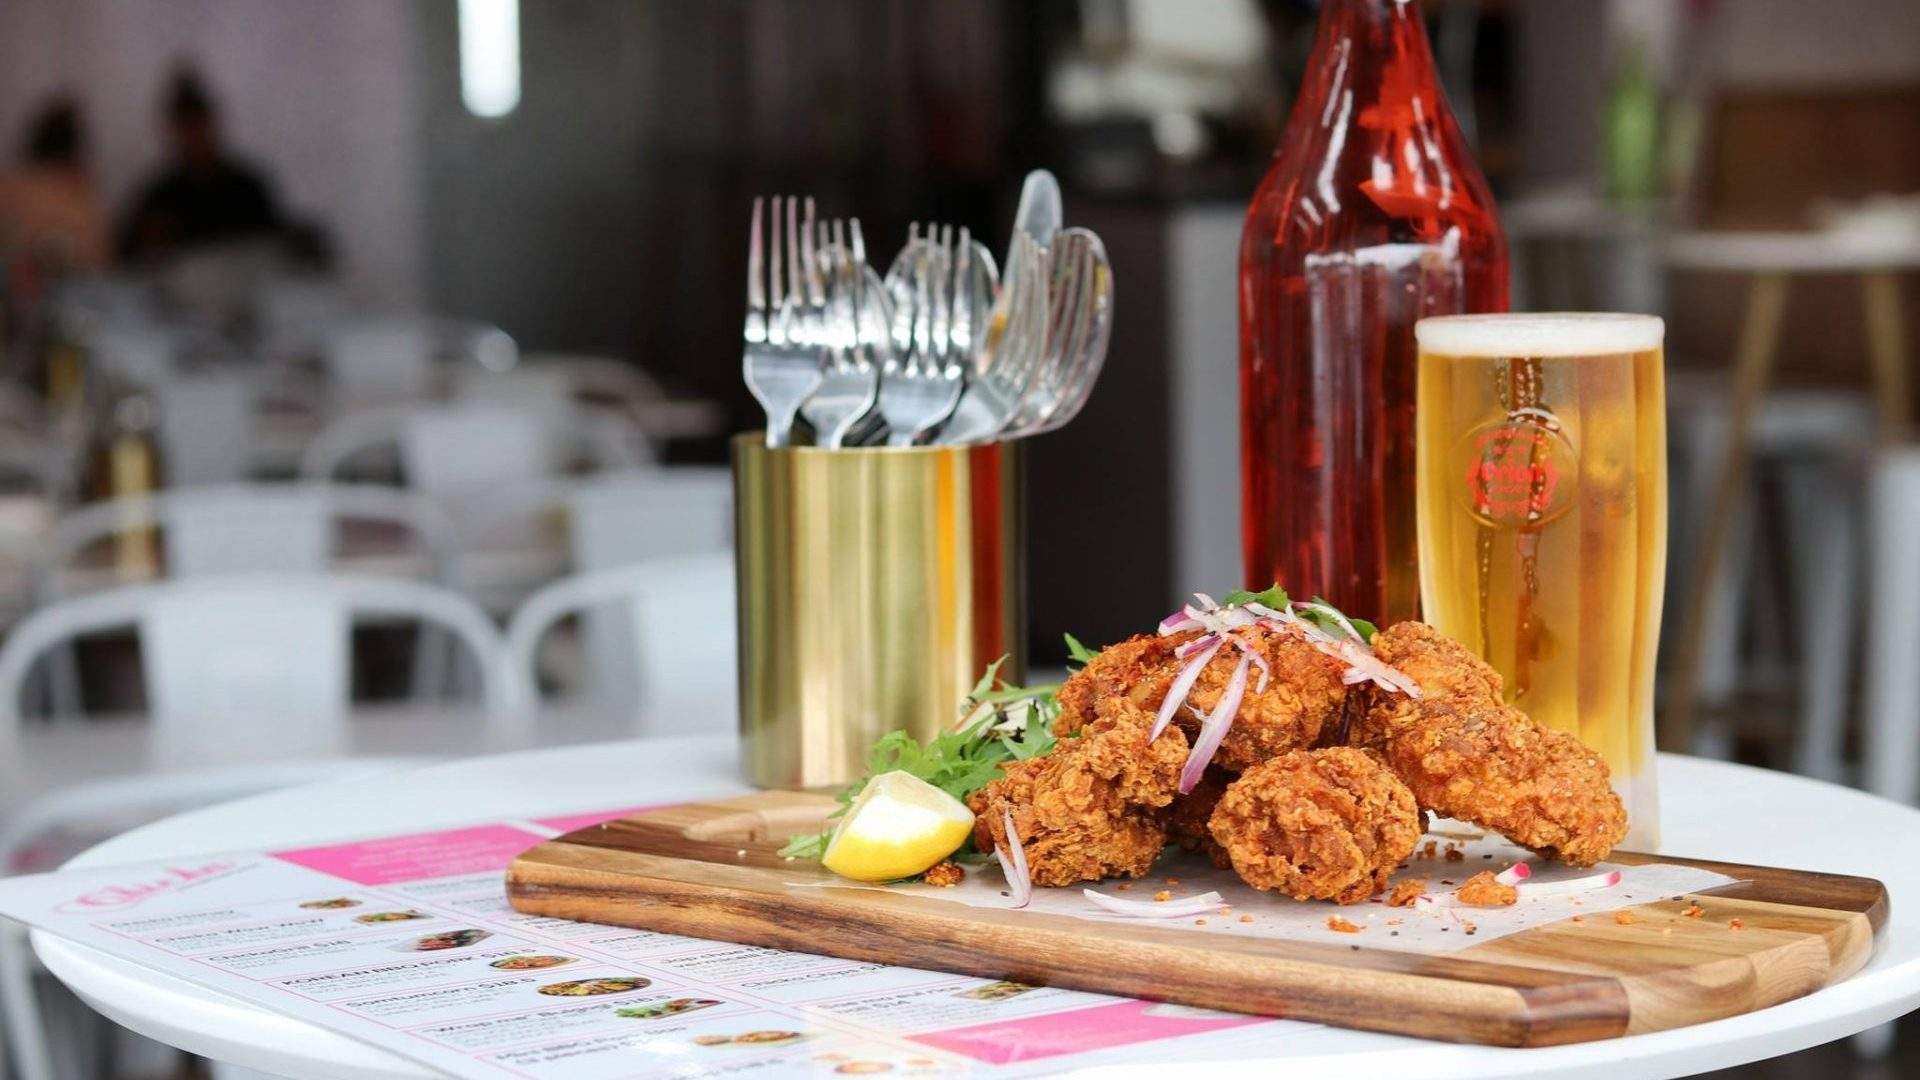 Meet Chicka, Kingsland's New Fried Chicken and Beer Joint